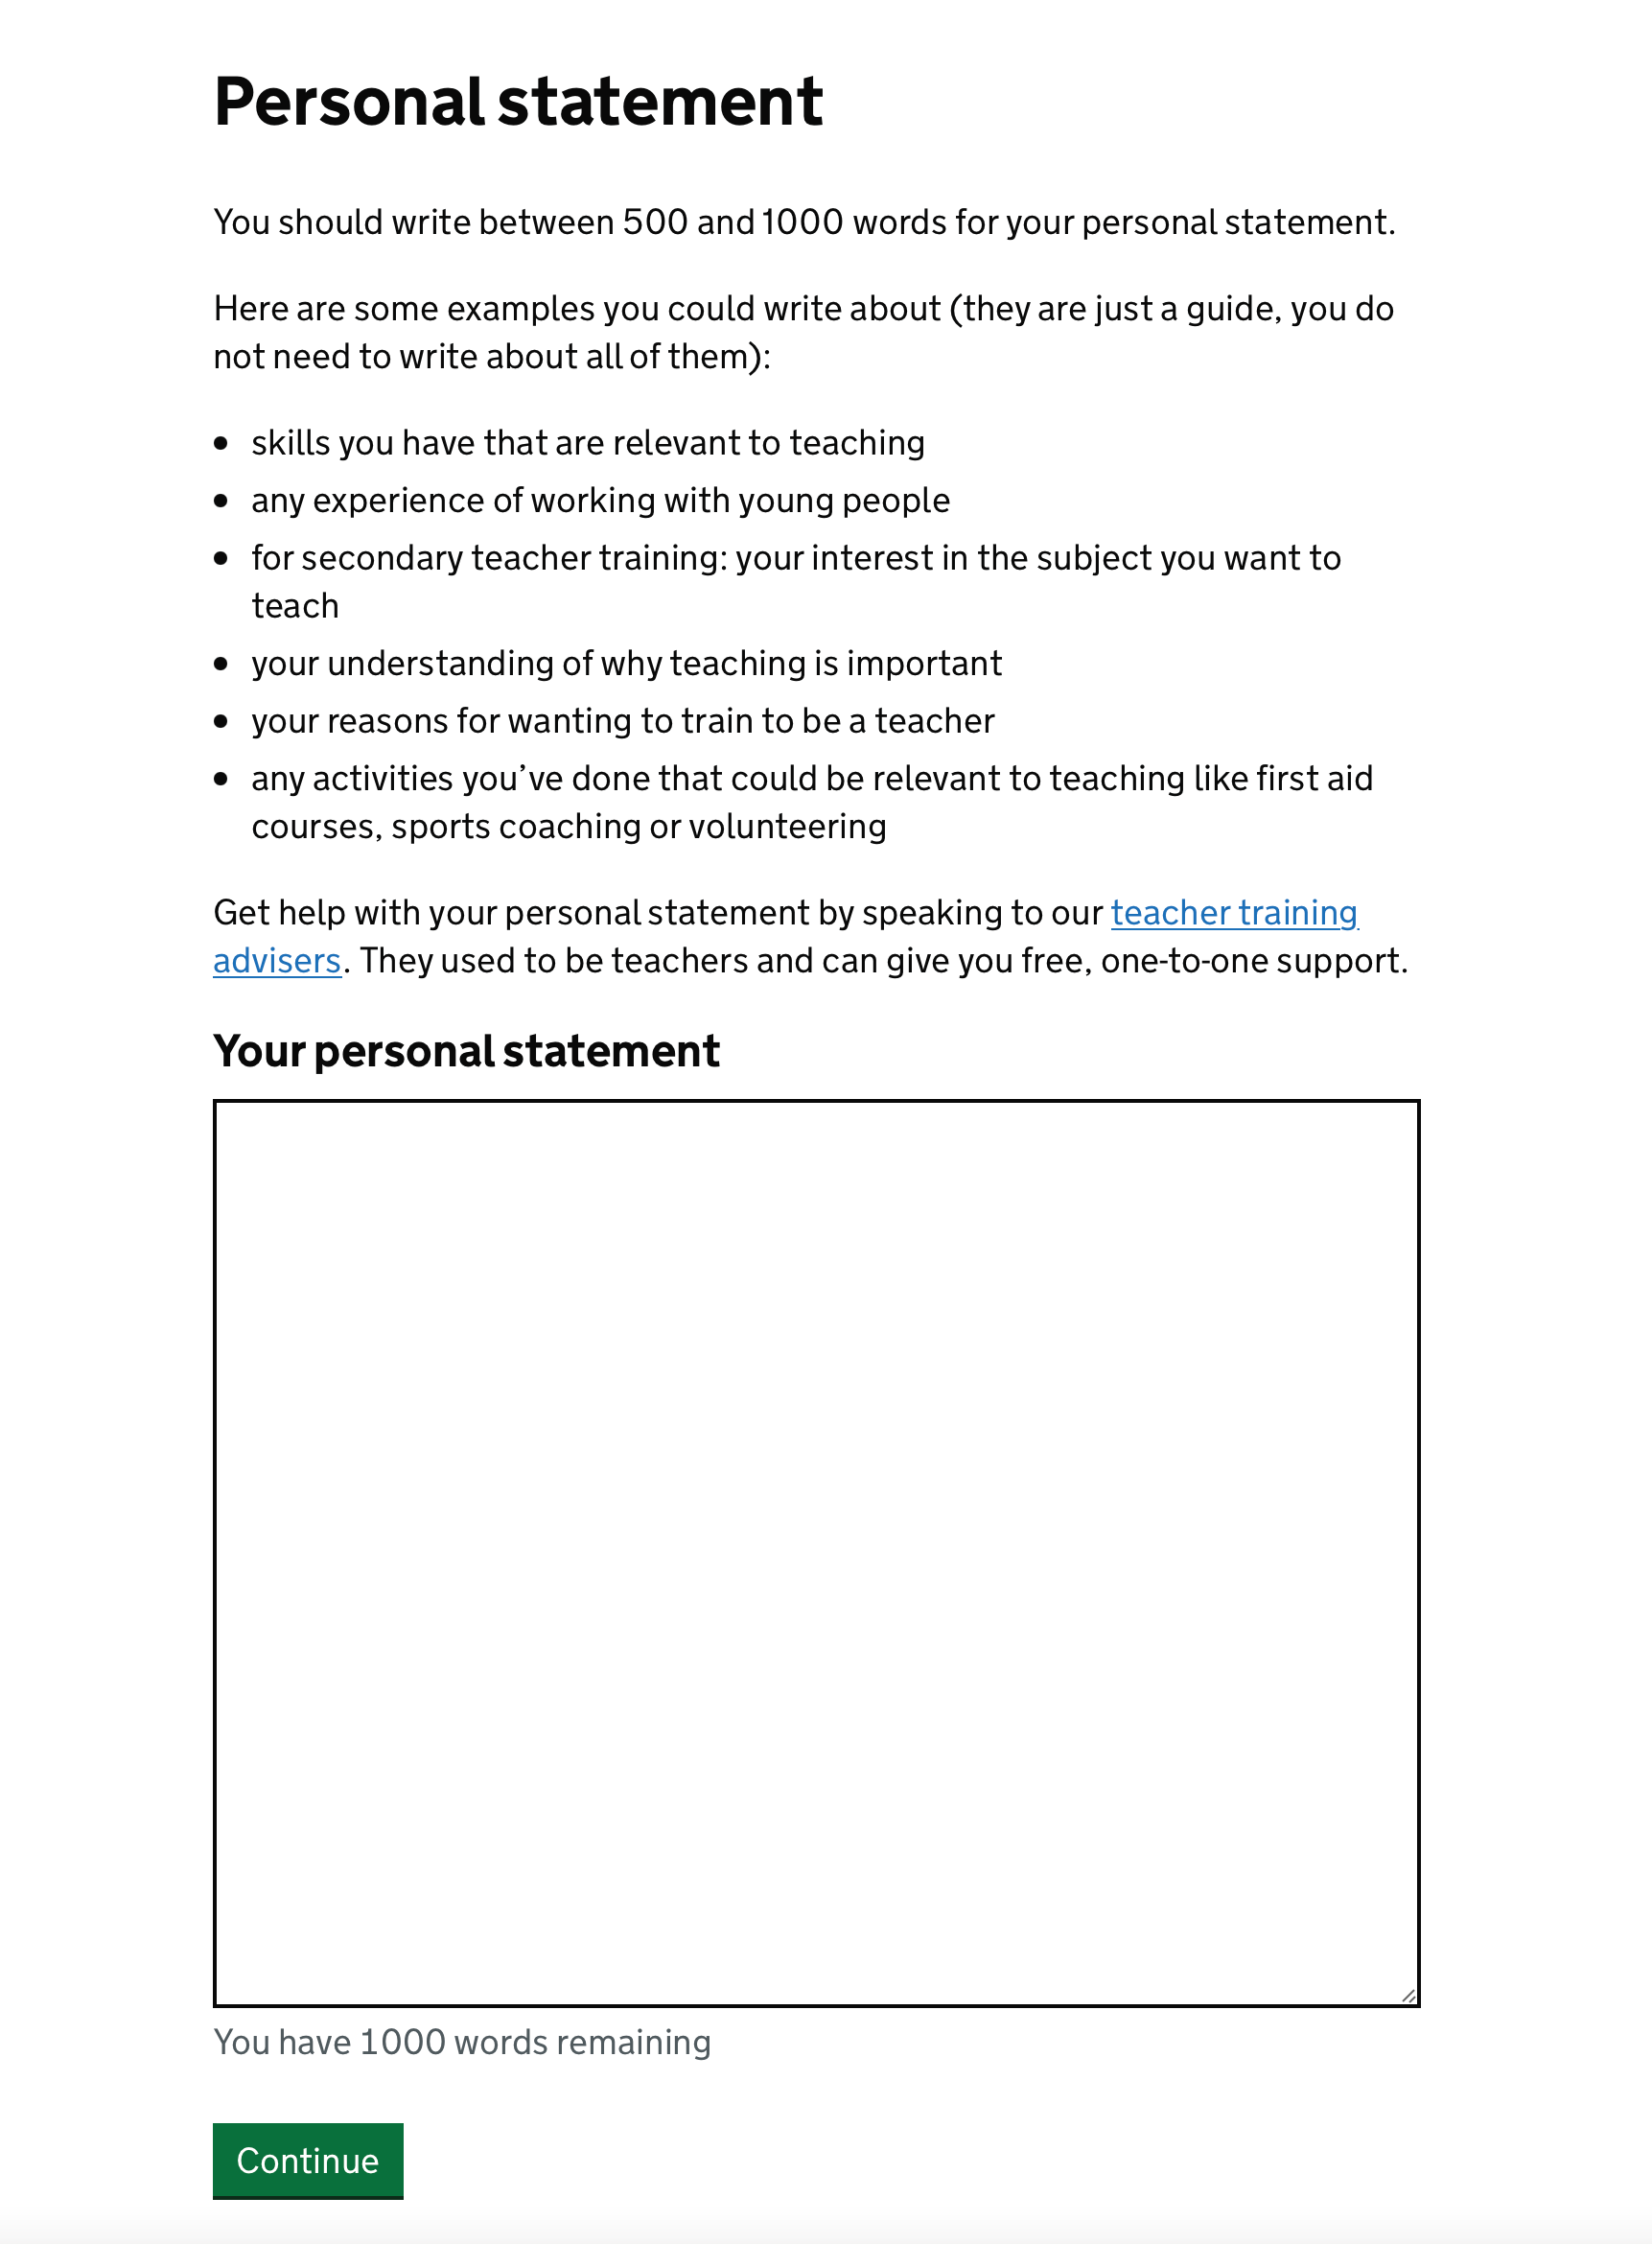 Screenshot with the heading ‘Personal Statement’, followed by content saying the user should write between 500 and 1000 words for their personal statement. The content also gives the user some examples they could write about, including skills and experience with young people they have, subject interest, their understanding of why teaching is important, their reasons for wanting to train to teach, and activities that could be relevant to teaching. The content below tells the user they can speak to a Teacher Training adviser for one-on-one support and provides a link. The screen then has a large empty text box and tells the user that they have 1000 words remaining underneath the text box.